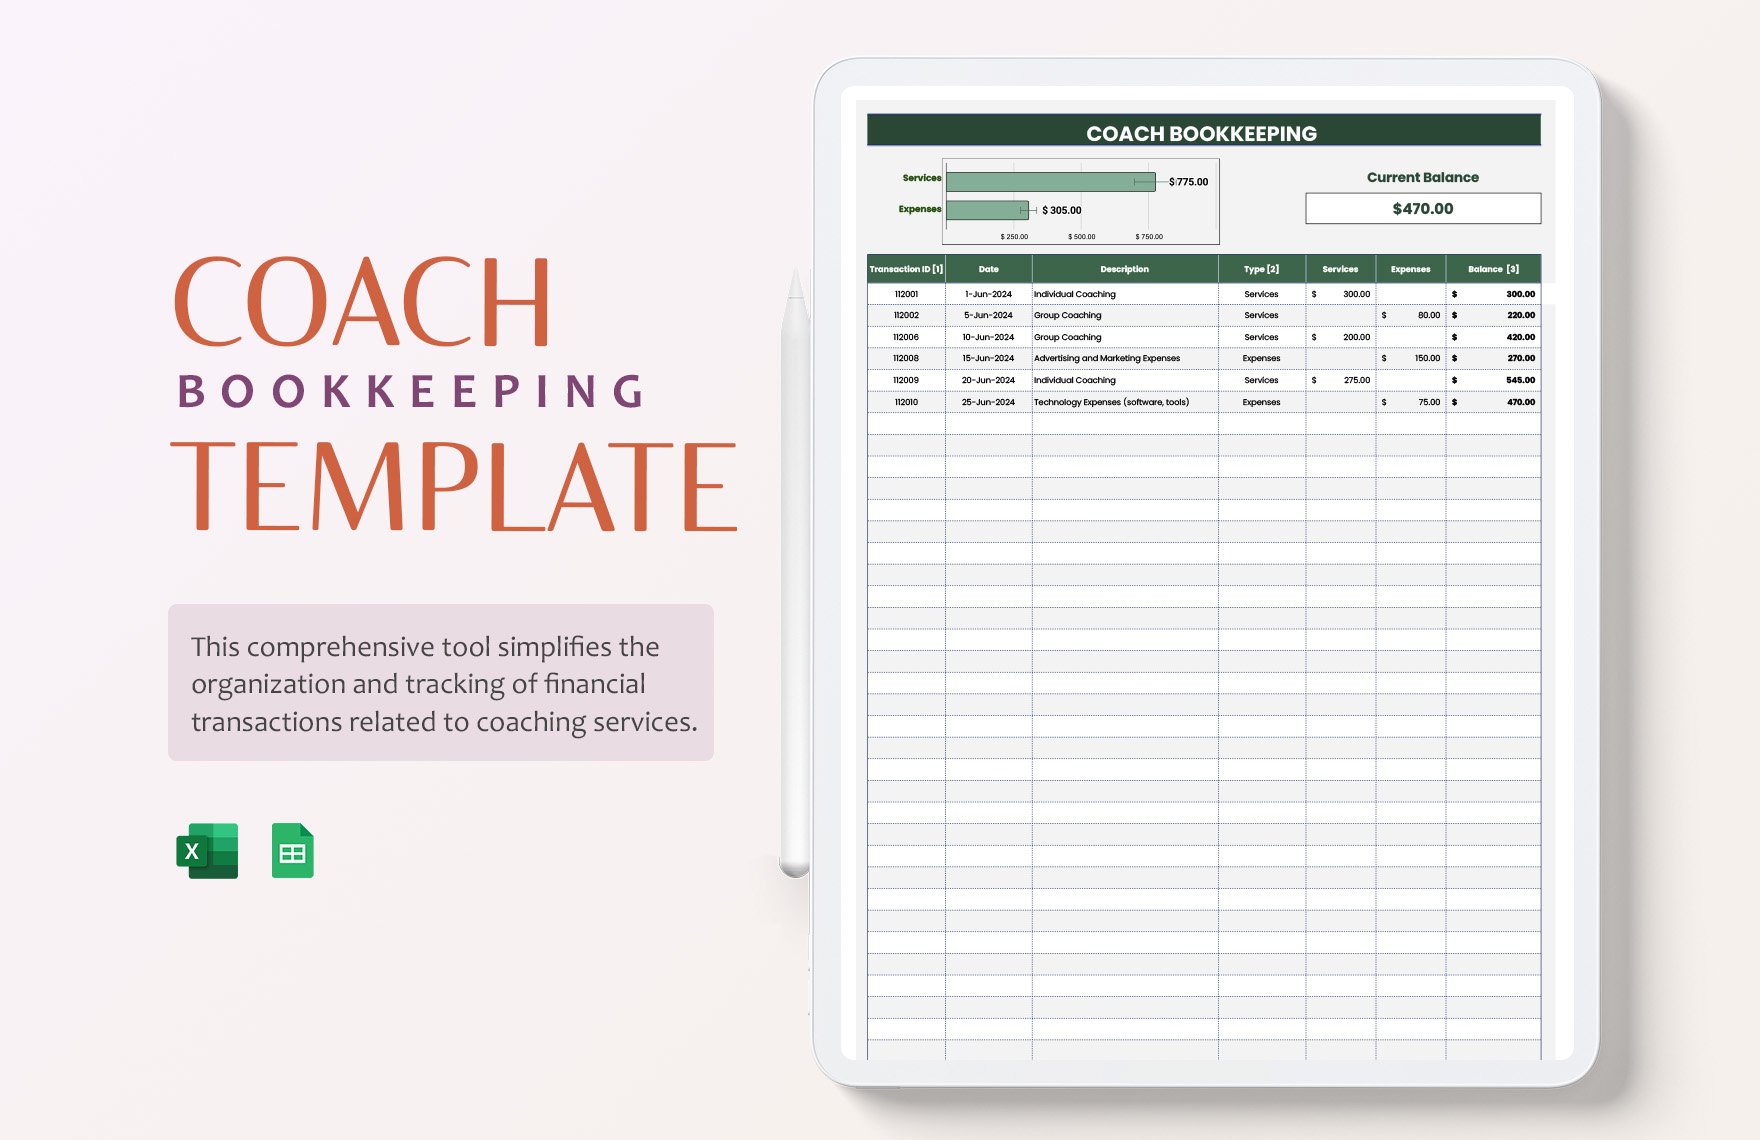 Coach Bookkeeping Template